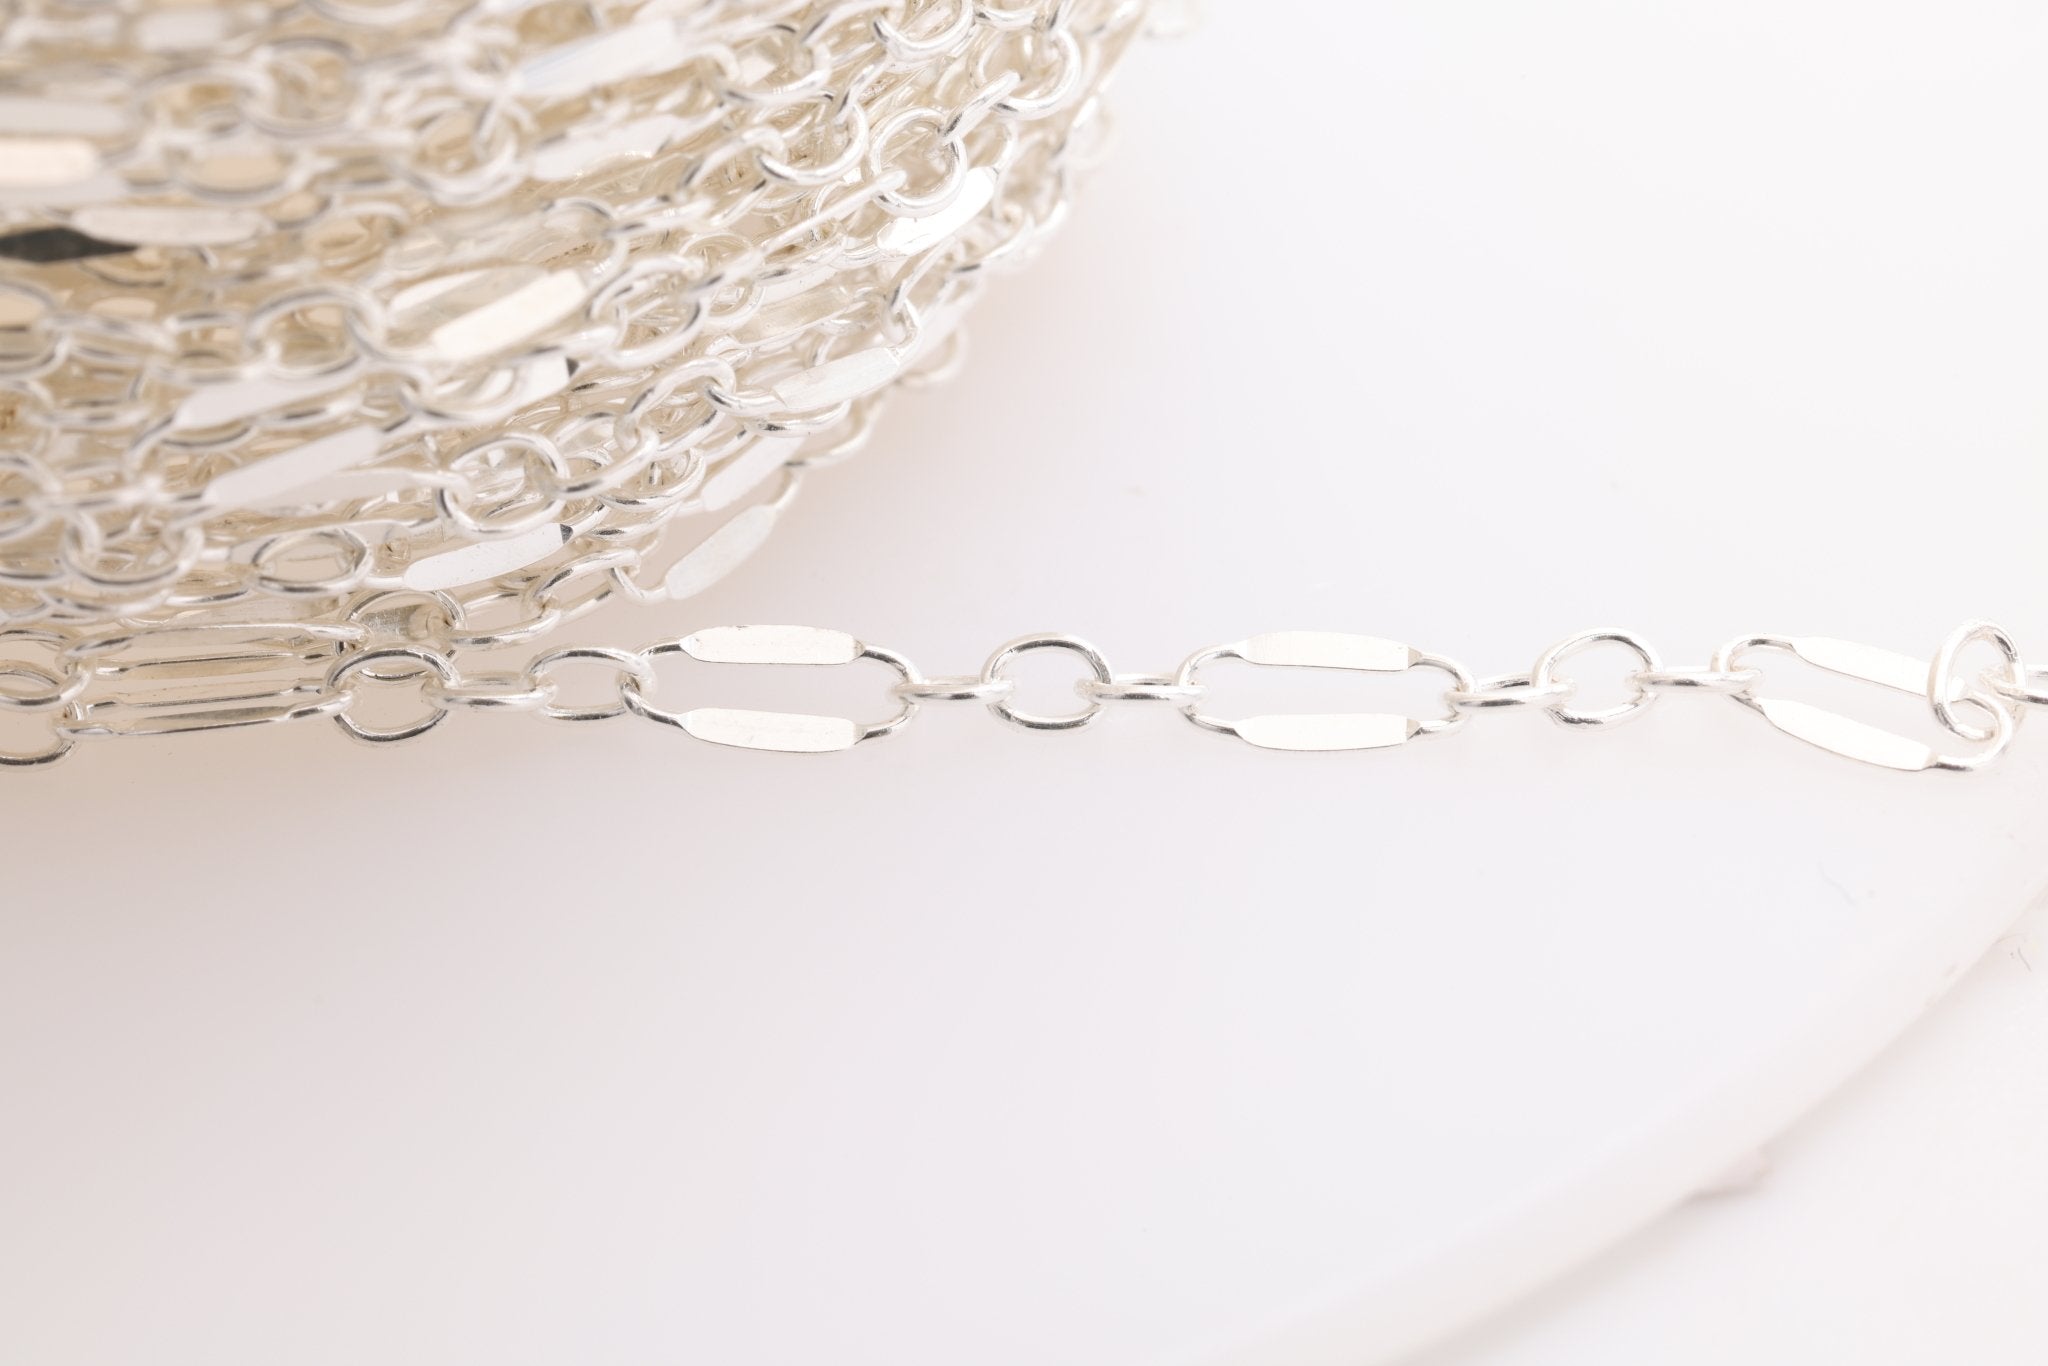 2mm x 6mm Long & Short Dapped Sequin Chain, 925 Sterling Silver, Bulk Pay Per Foot Uncut Spools For Jewelers - HarperCrown